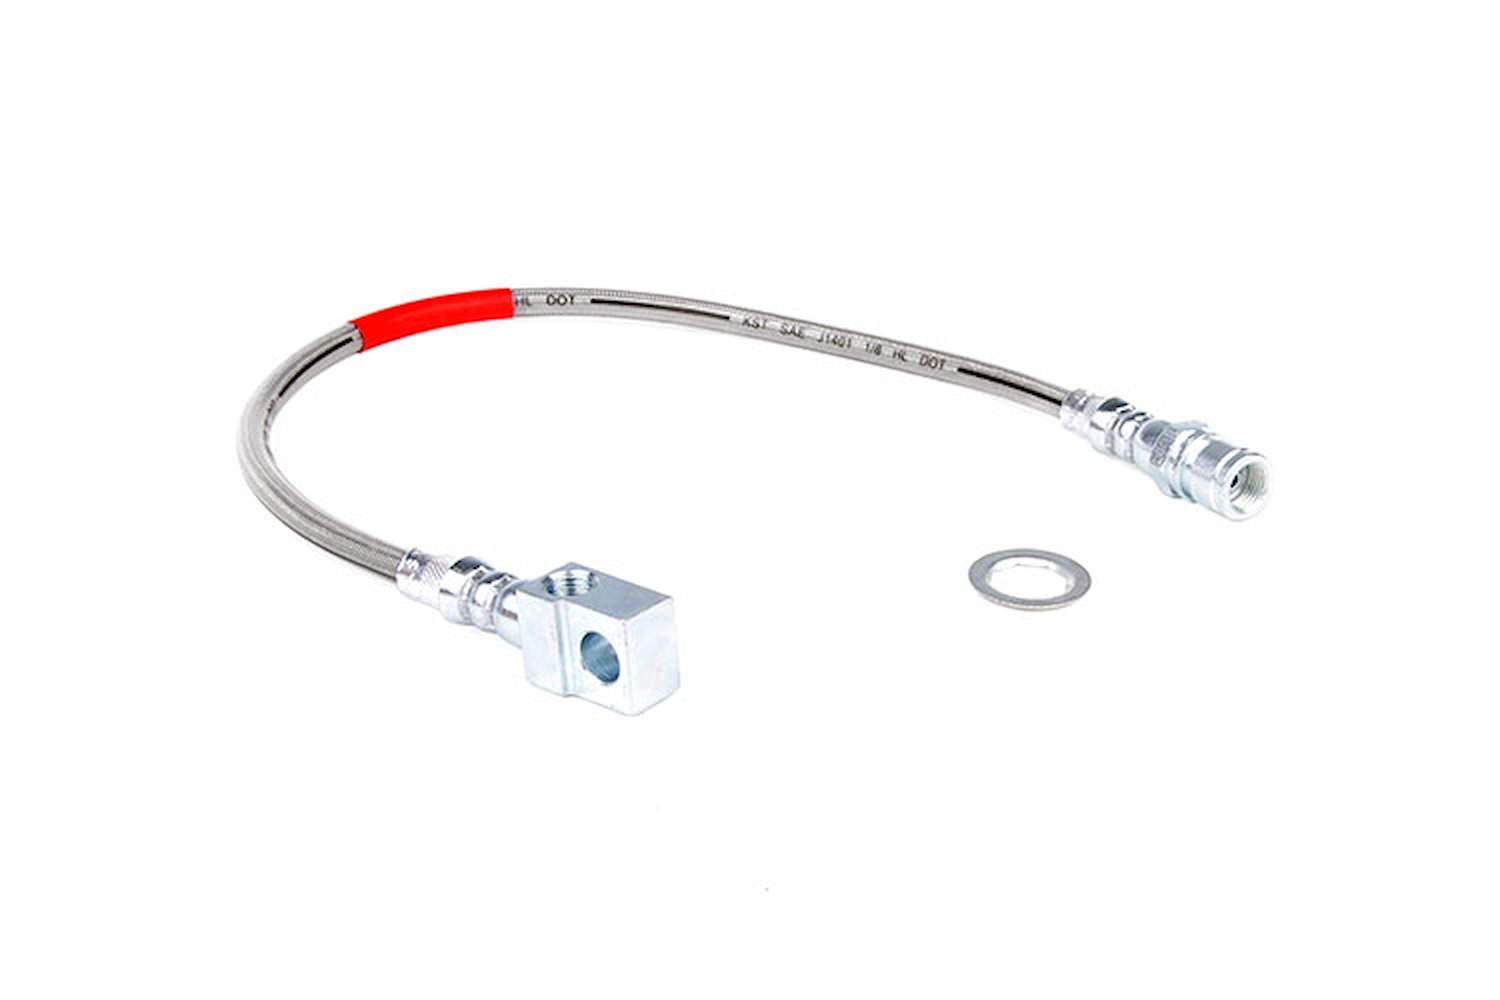 89335S Rear Extended Stainless Steel Brake Line for 4-6-inch Lifts